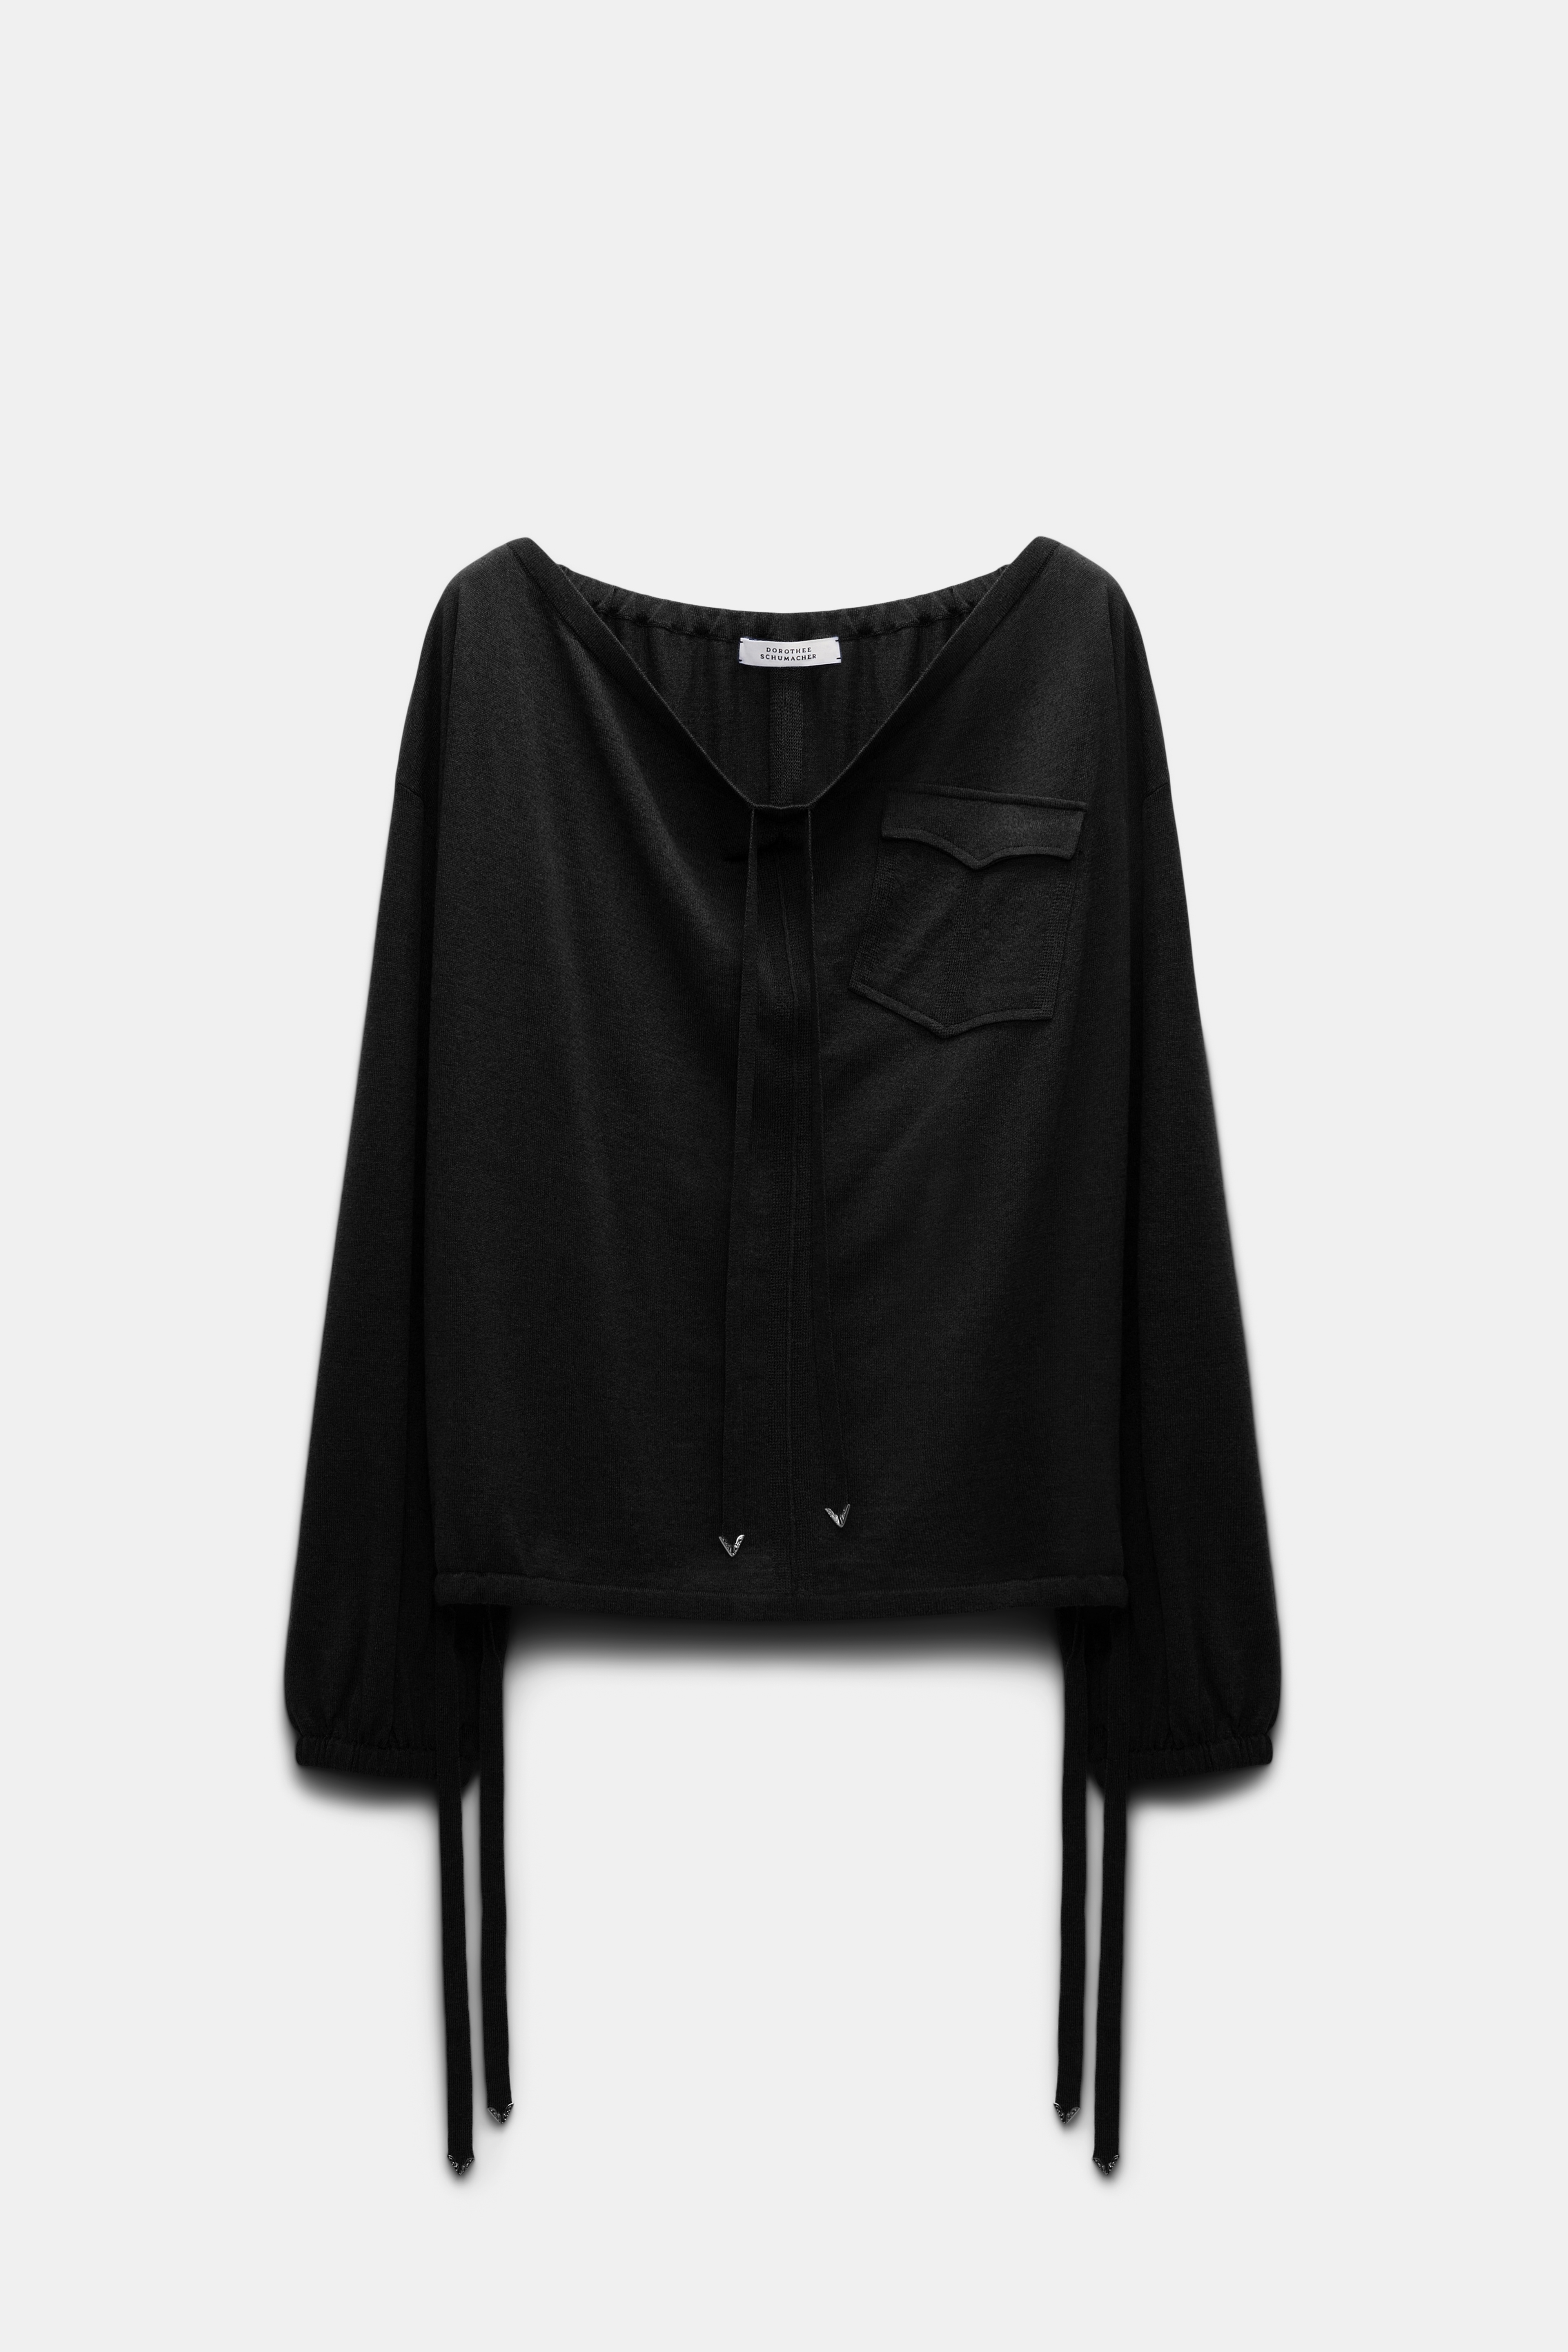 REFINED ESSENTIALS blouse - 1